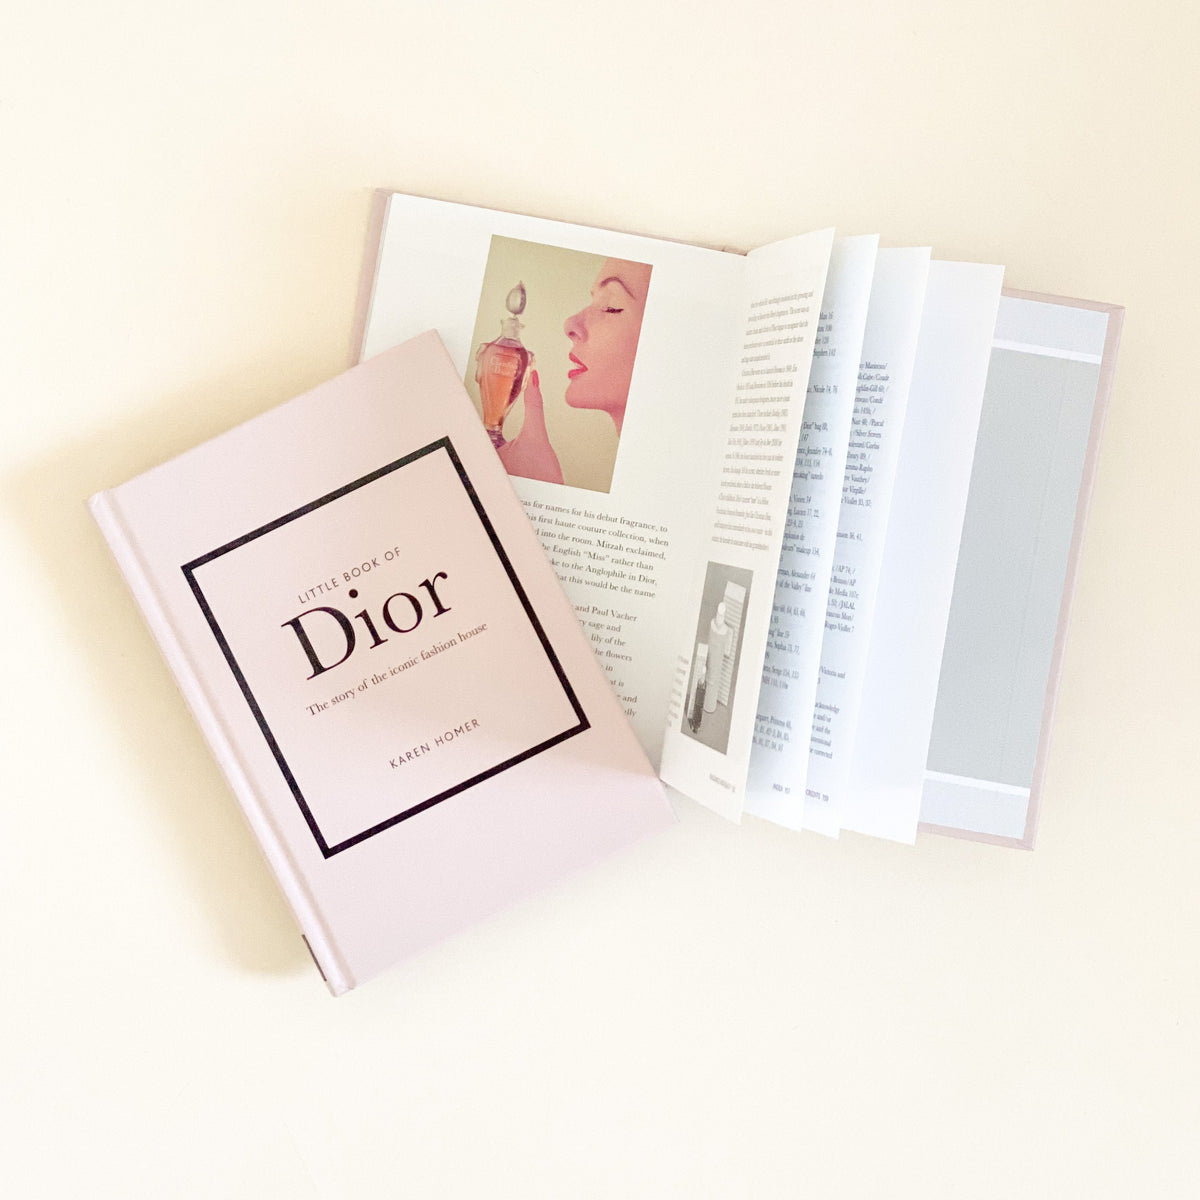 The Little Book Of Dior